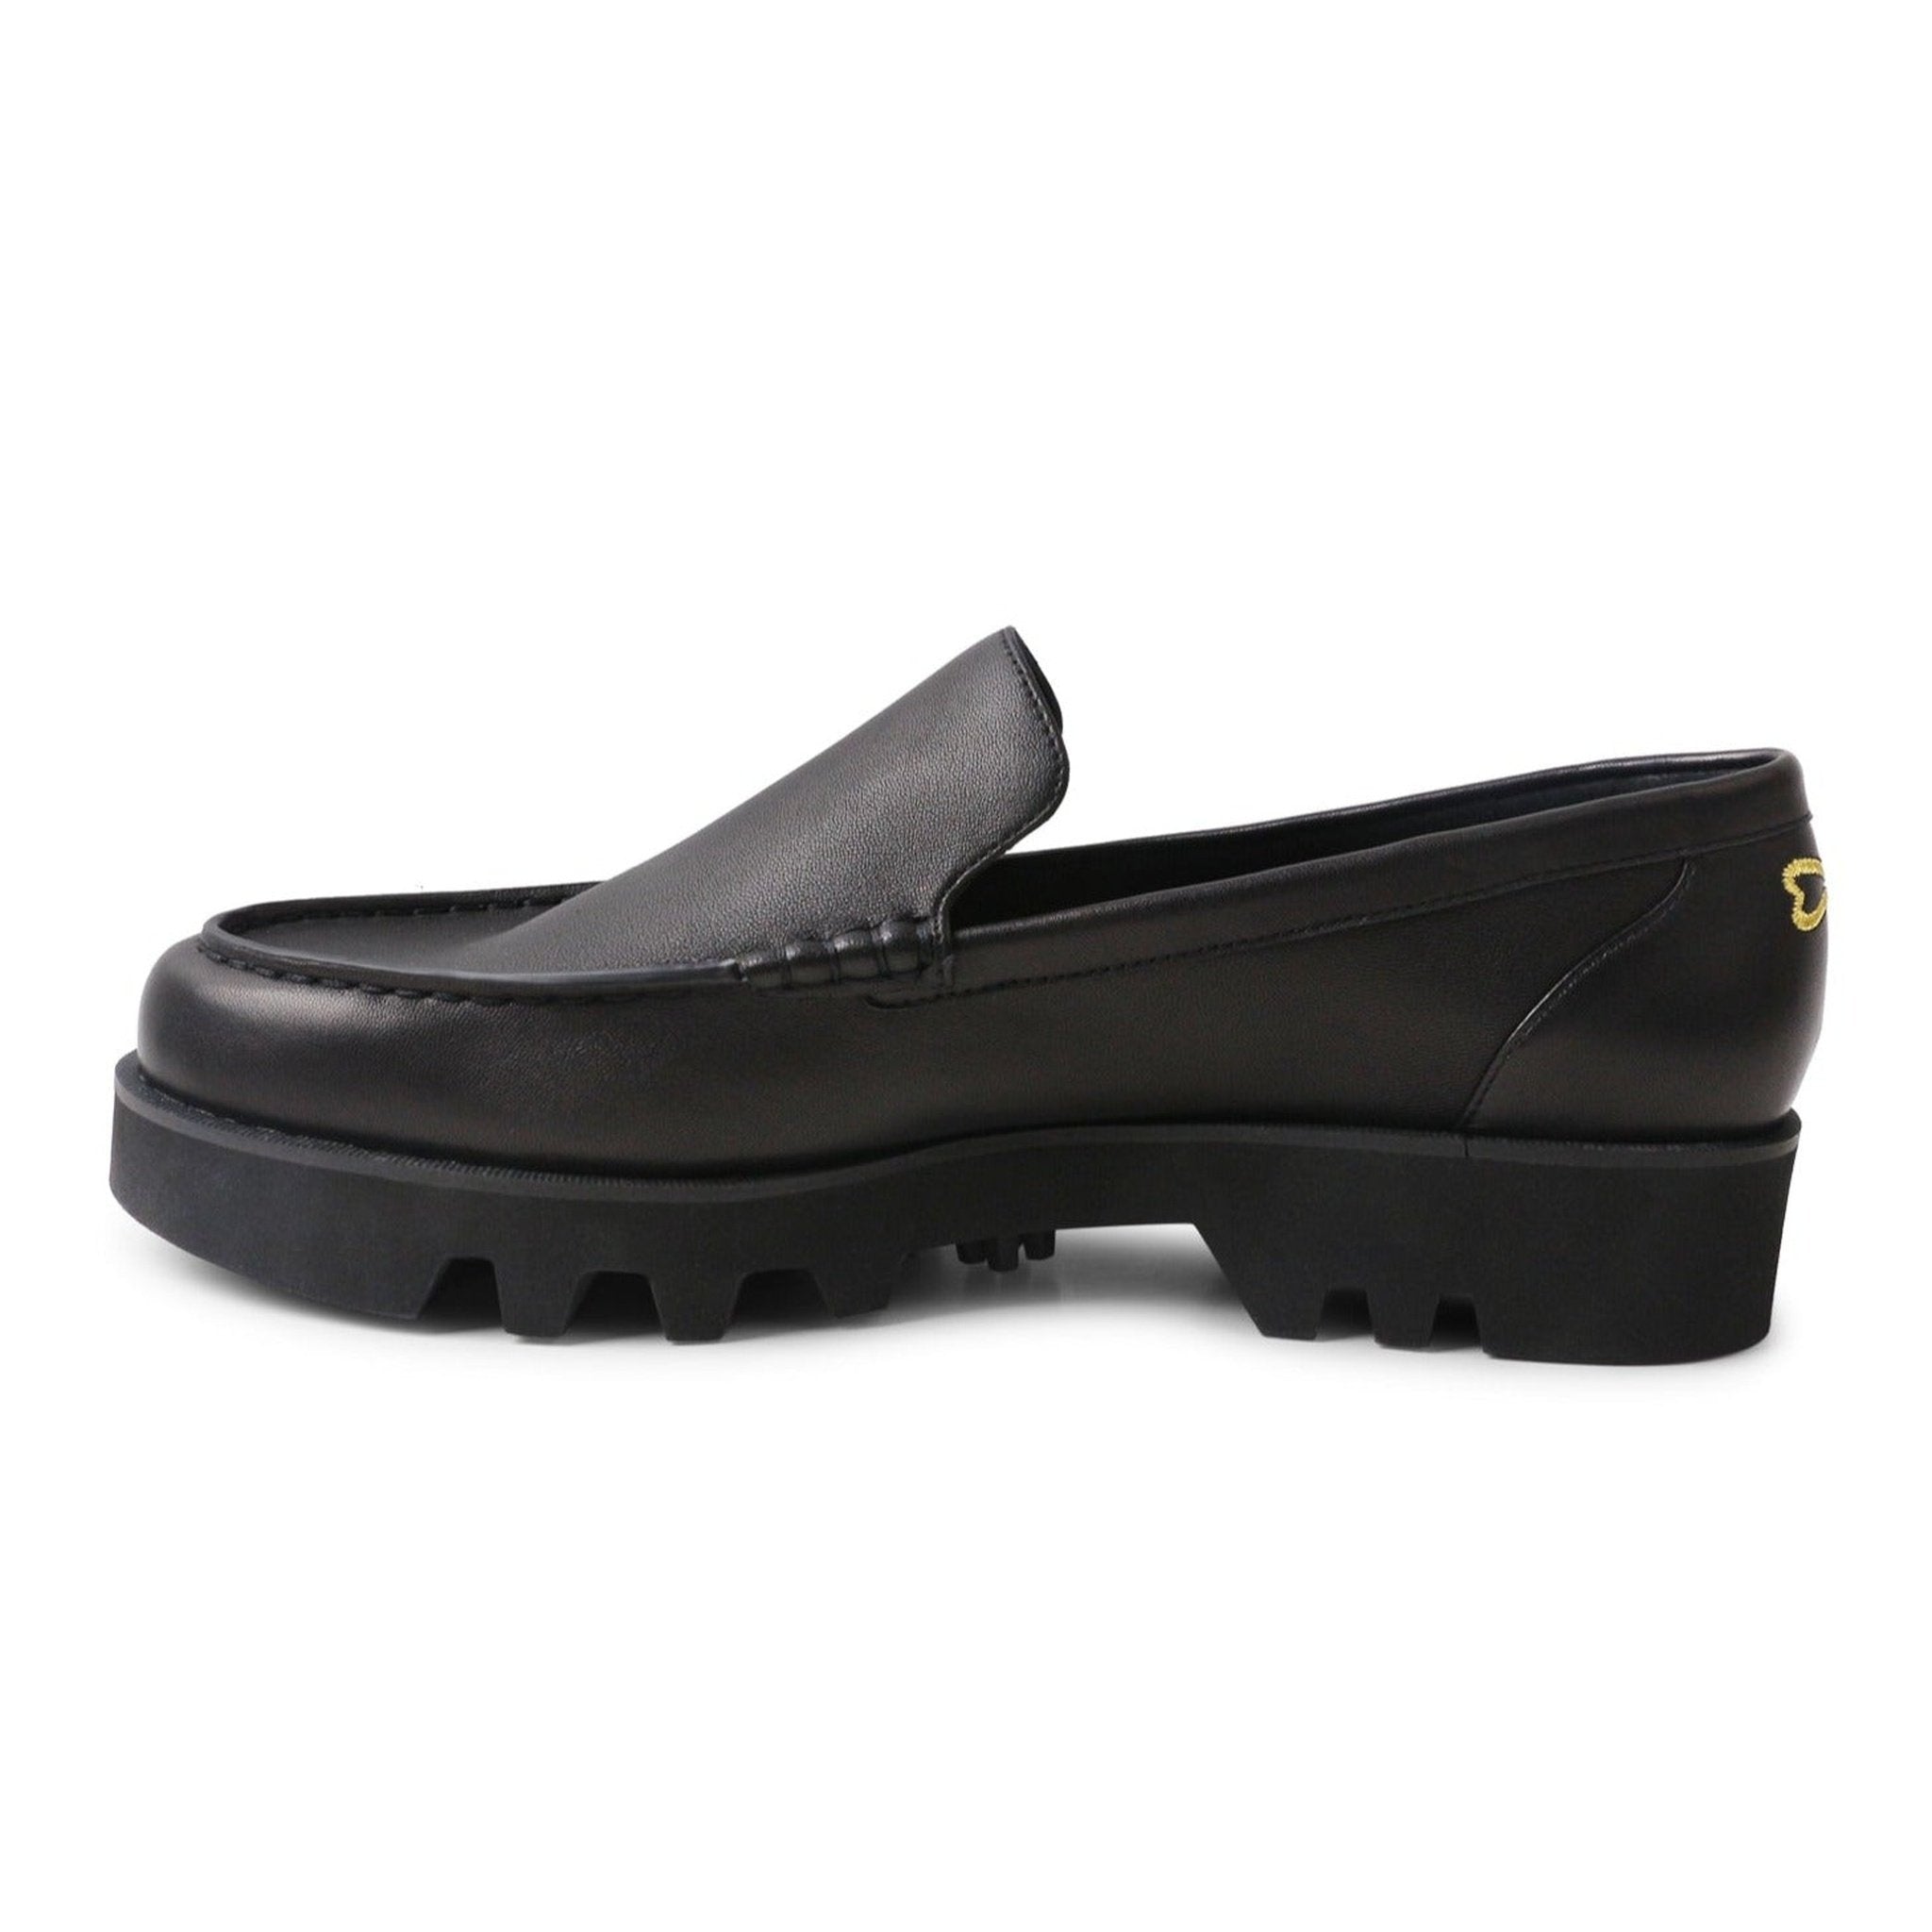 smooth leather loafer black large sizes